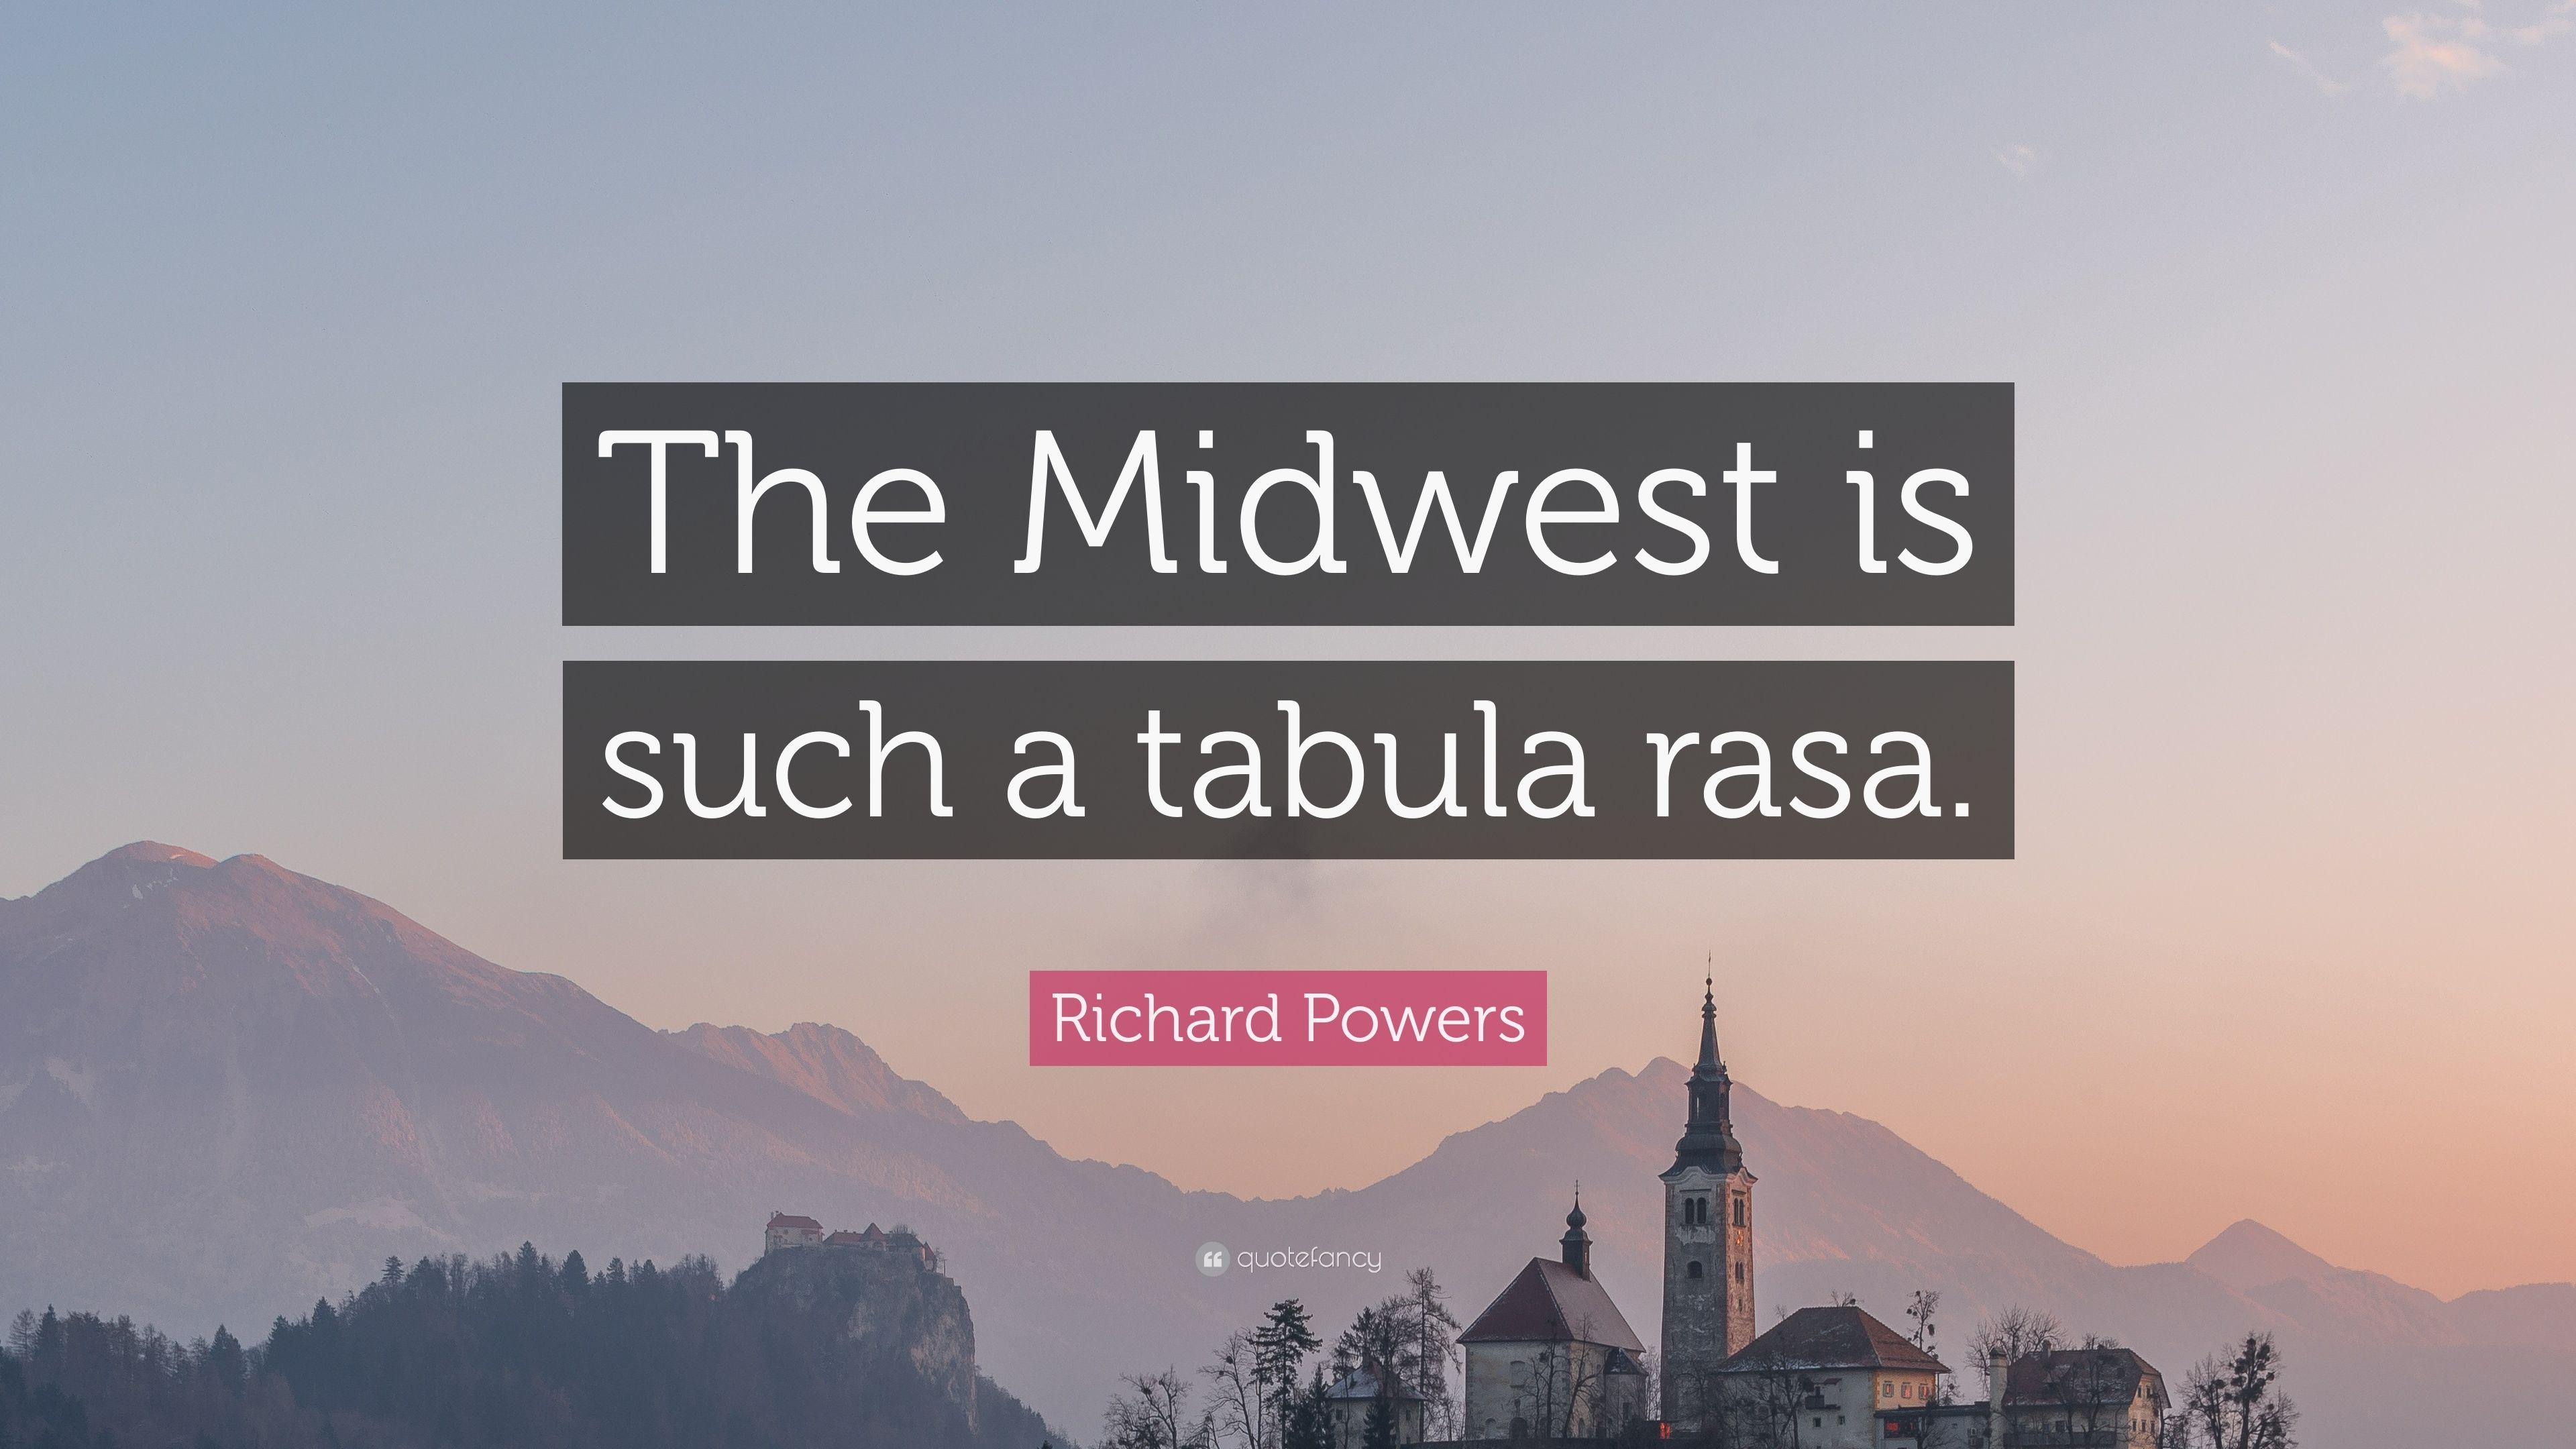 Richard Powers Quote: “The Midwest is such a tabula rasa.” 7